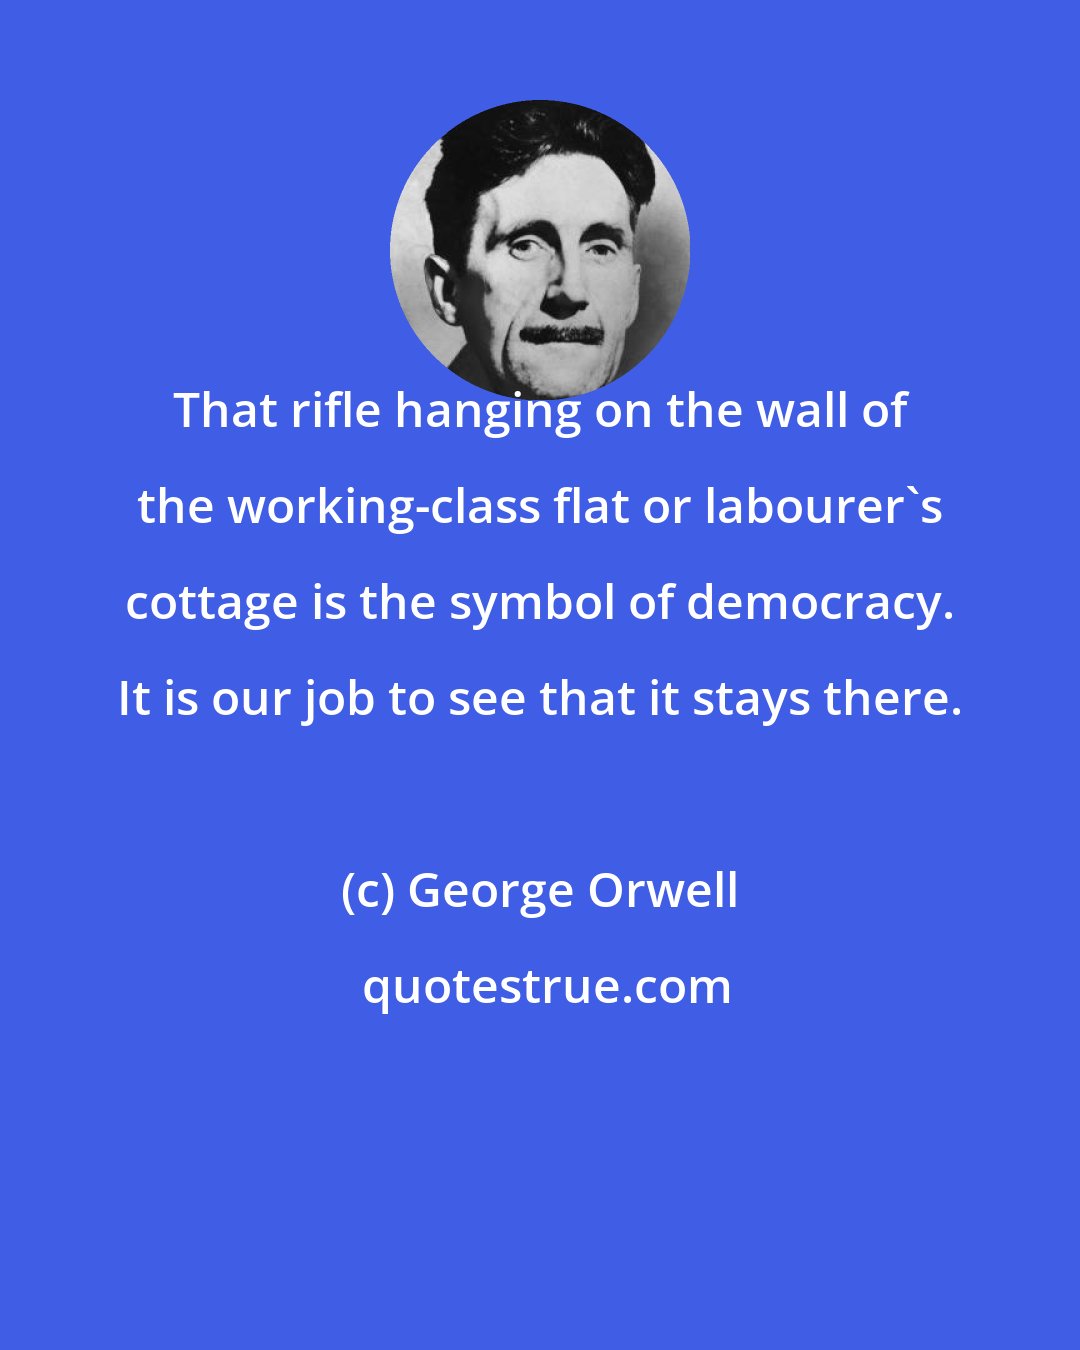 George Orwell: That rifle hanging on the wall of the working-class flat or labourer's cottage is the symbol of democracy. It is our job to see that it stays there.